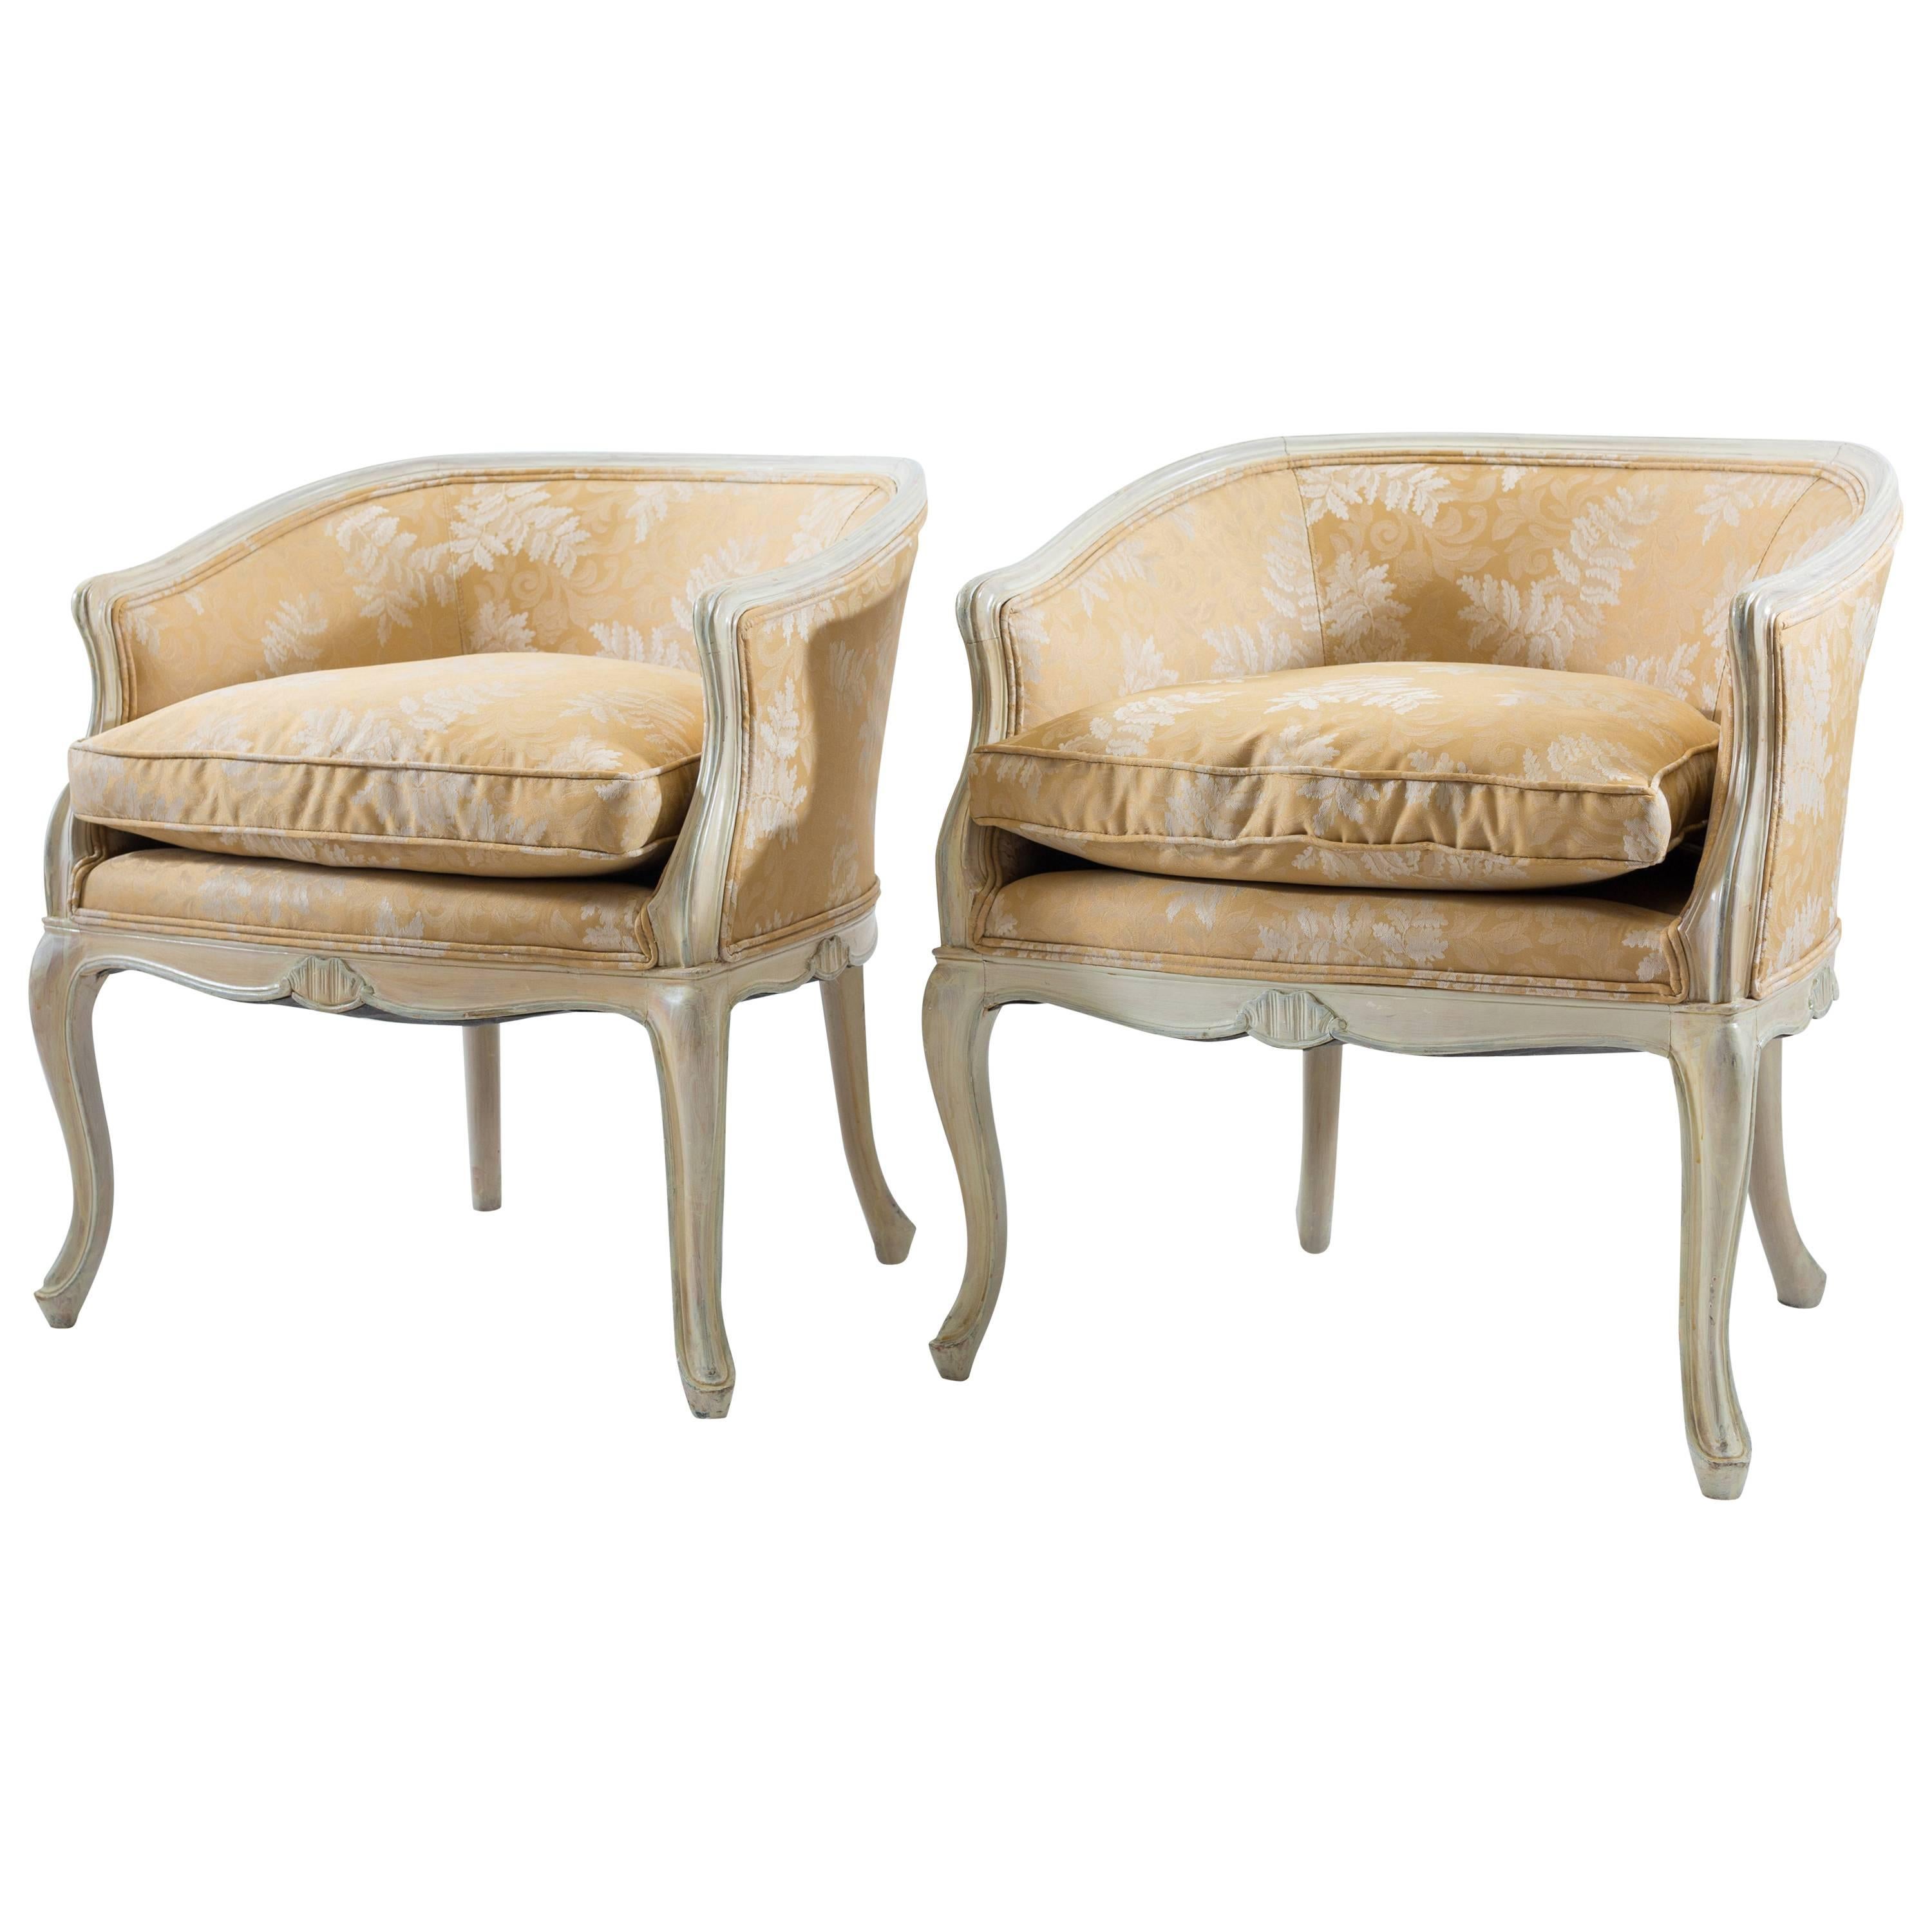 Pair of Louis XV Bergere Chairs with Carved Shell Motifs For Sale